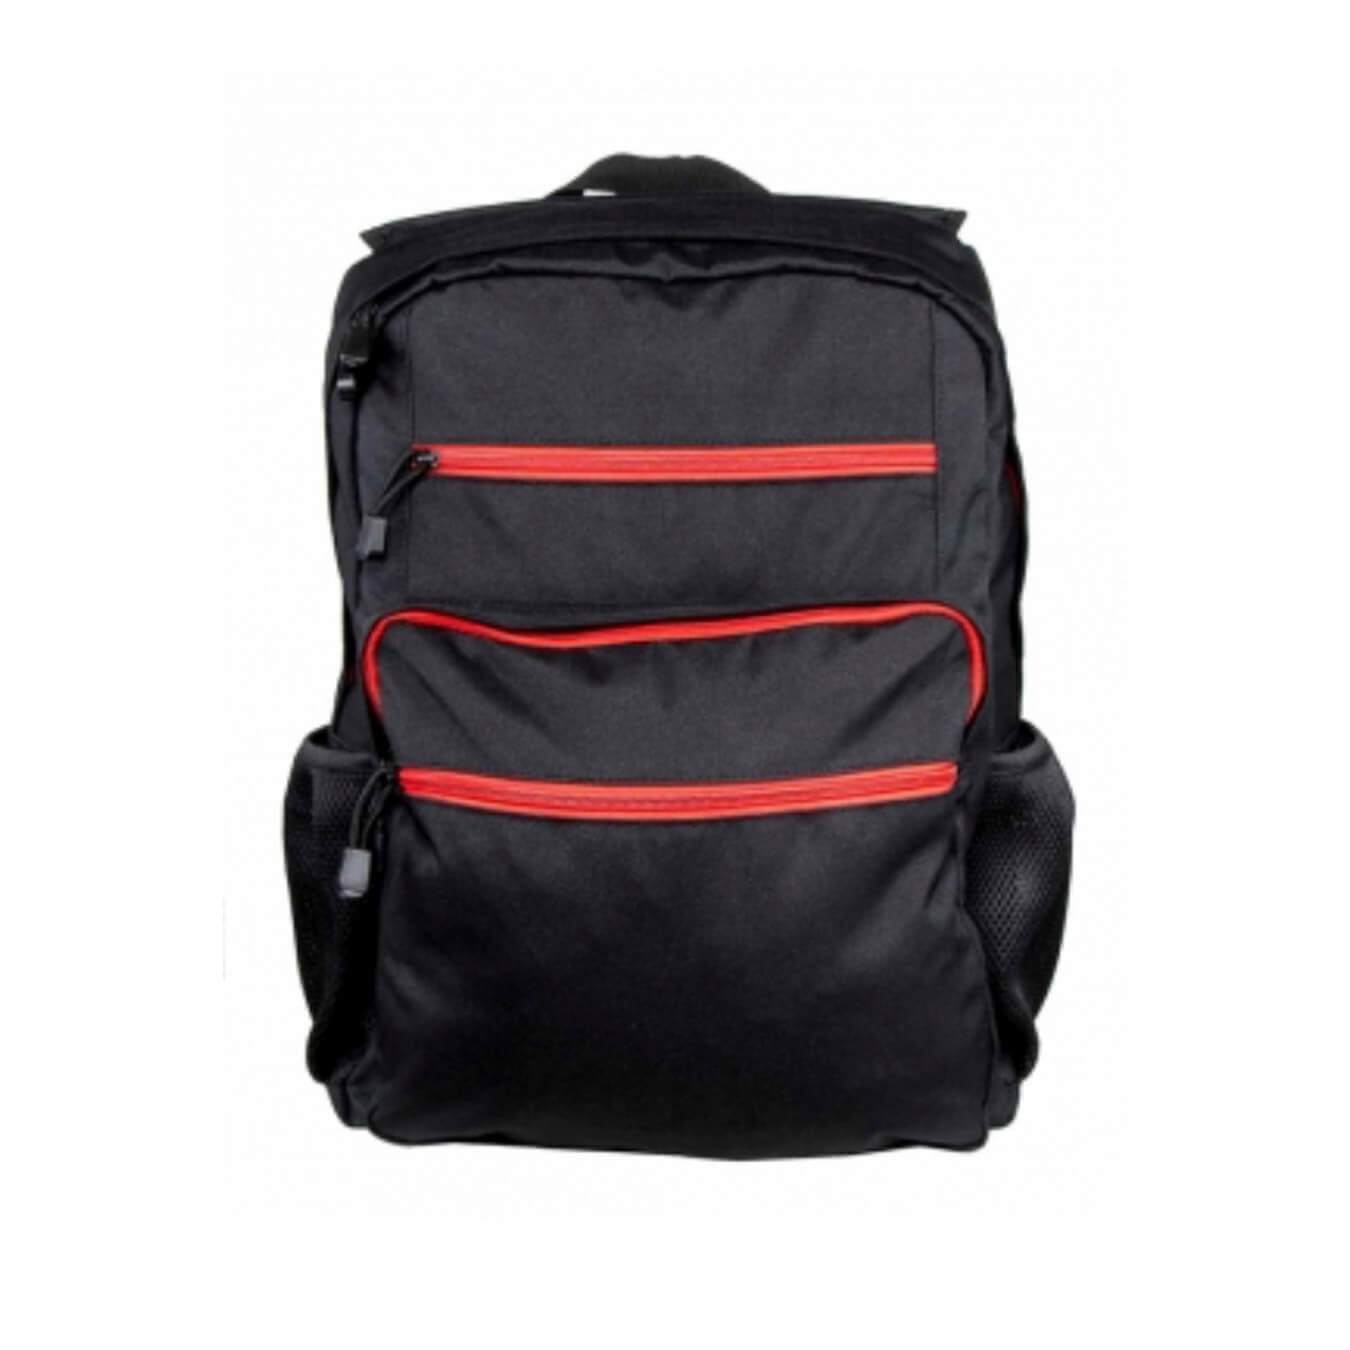 Bulletproof Backpack Model 3003 with Level IIIA Front and Rear Armor Compartments - Guardian Gear